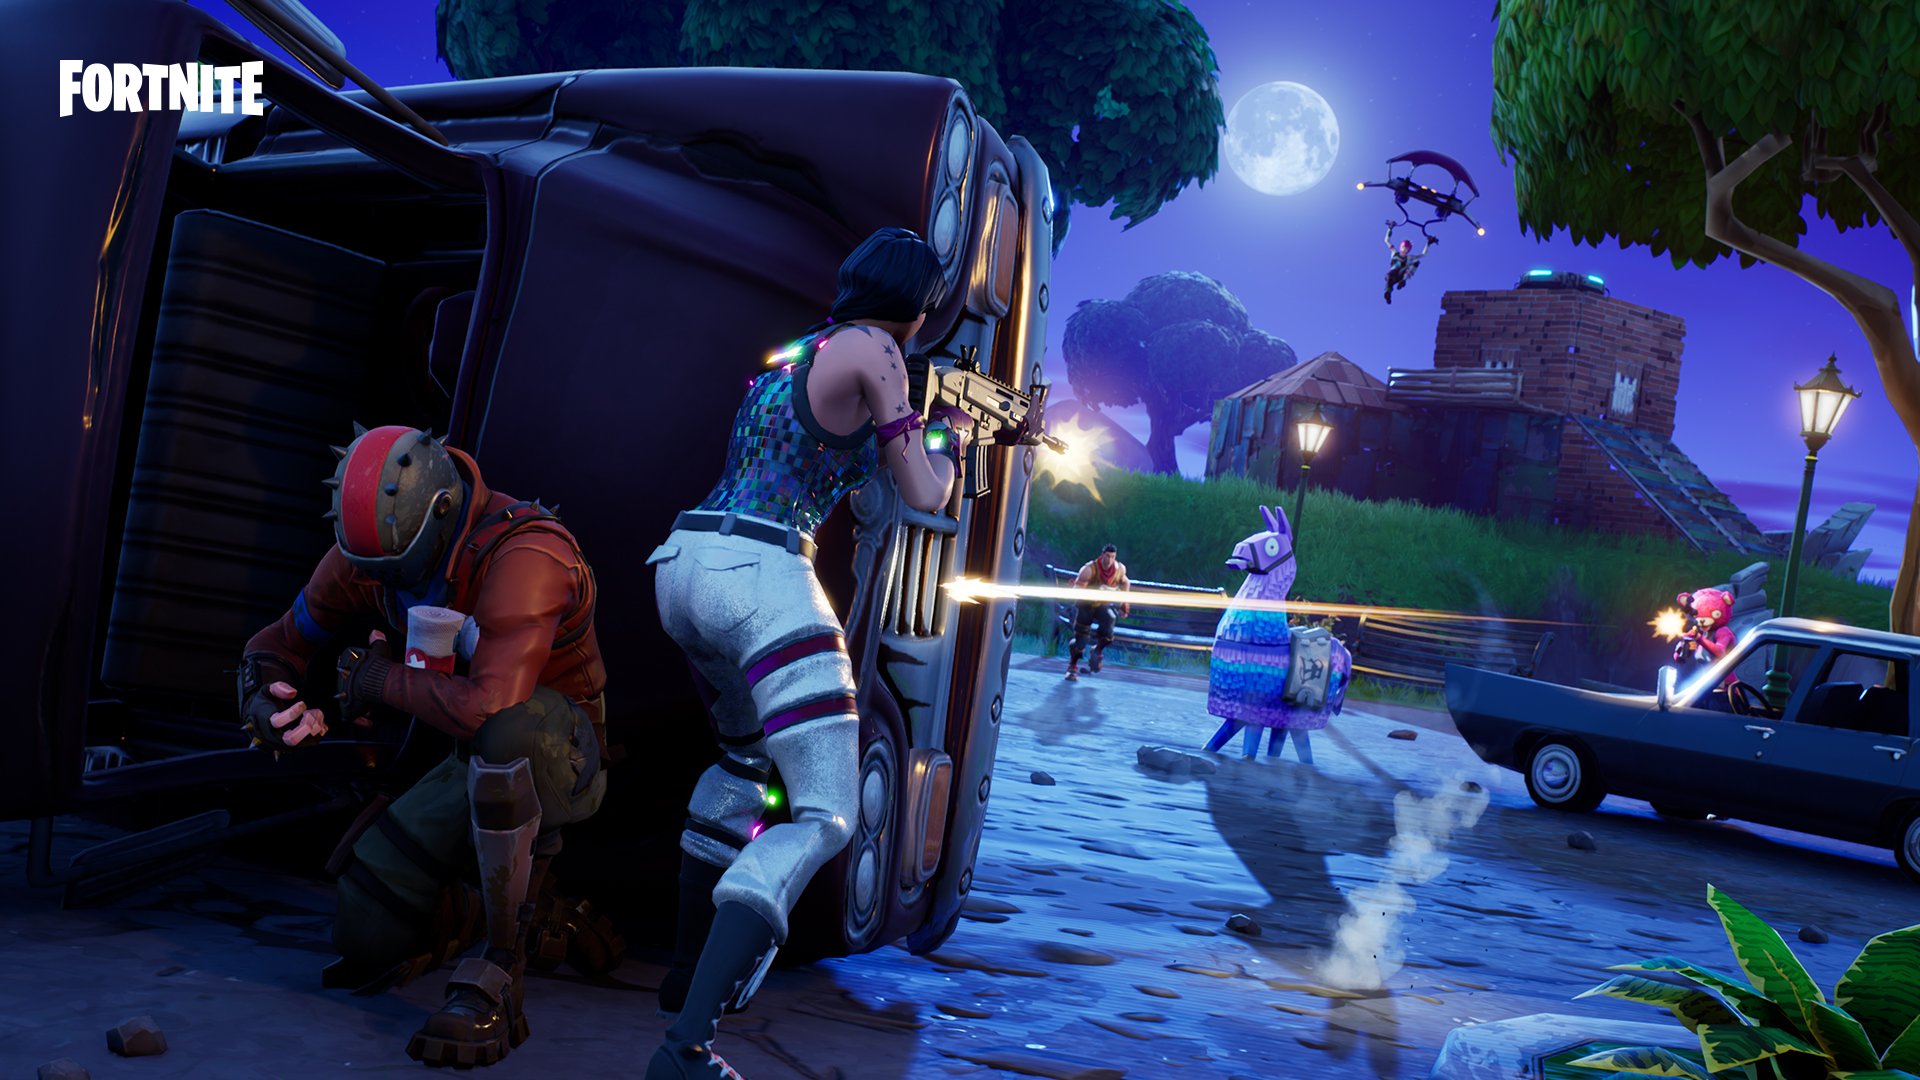 Netflix says that 'Fortnite' is a bigger threat to its business than HBO